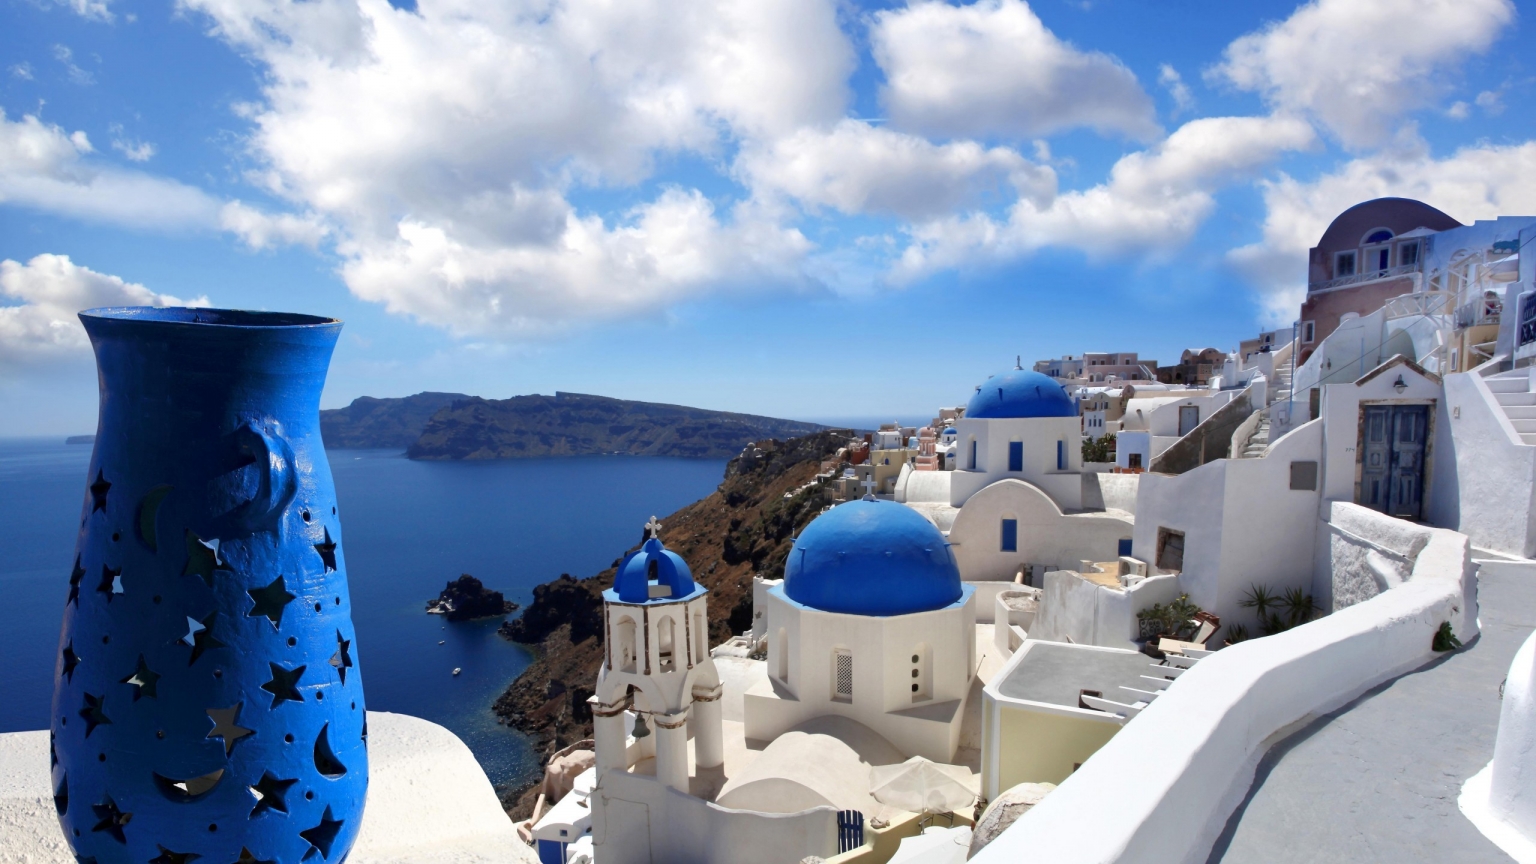 Ideal View from Santorini for 1536 x 864 HDTV resolution